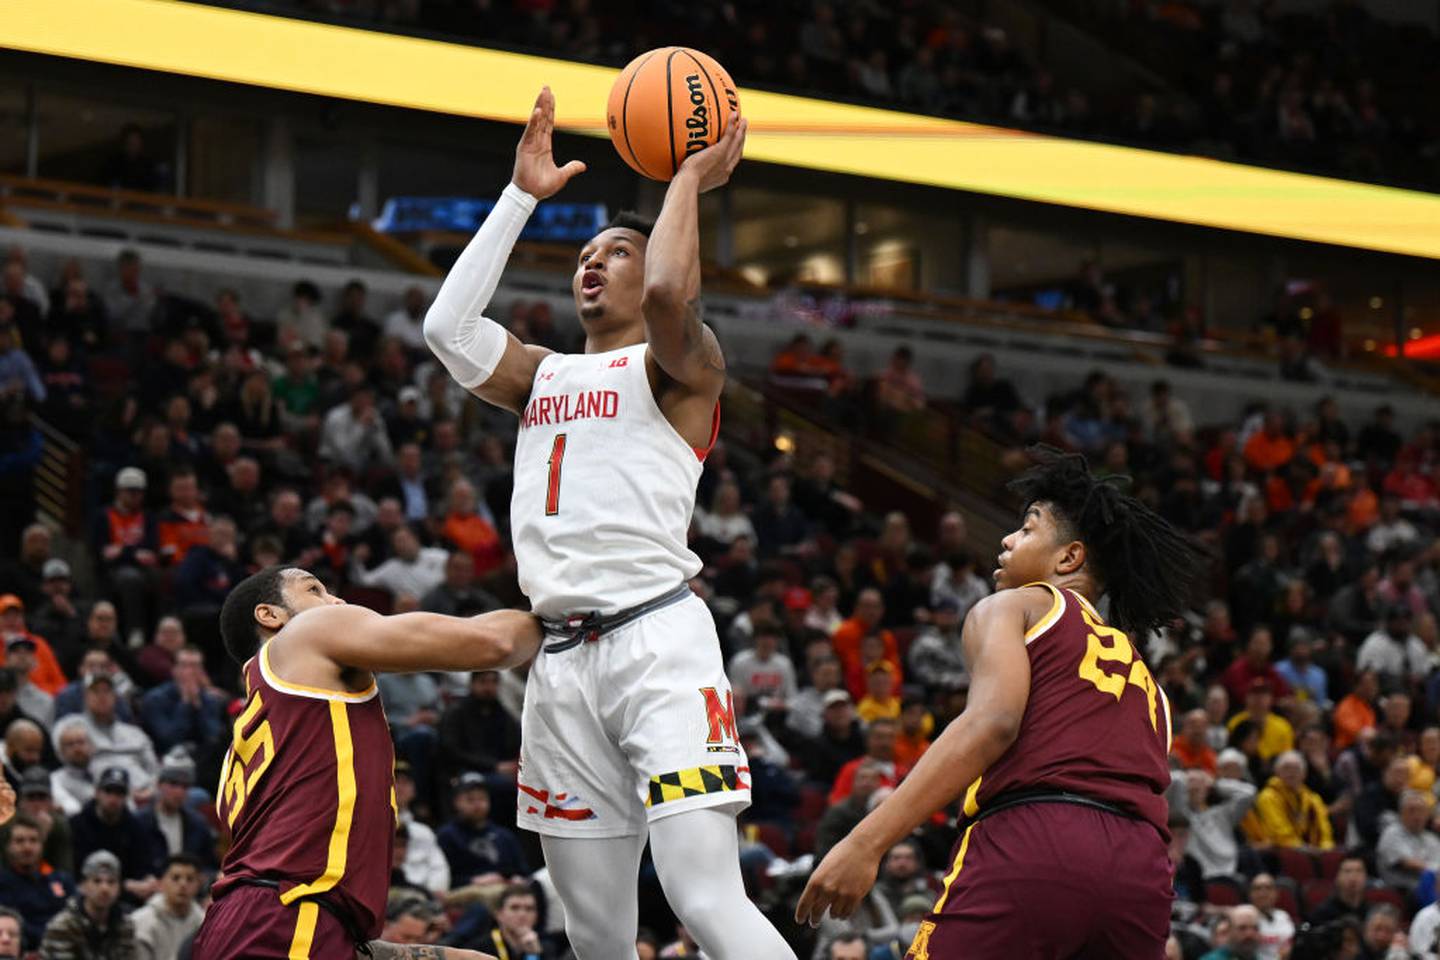 CHICAGO, ILLINOIS - MARCH 09: Jahmir Young #1 of the Maryland Terrapins shoots in the first half against Ta'lon Cooper #55 of the Minnesota Golden Gophers at United Center on March 09, 2023 in Chicago, Illinois.